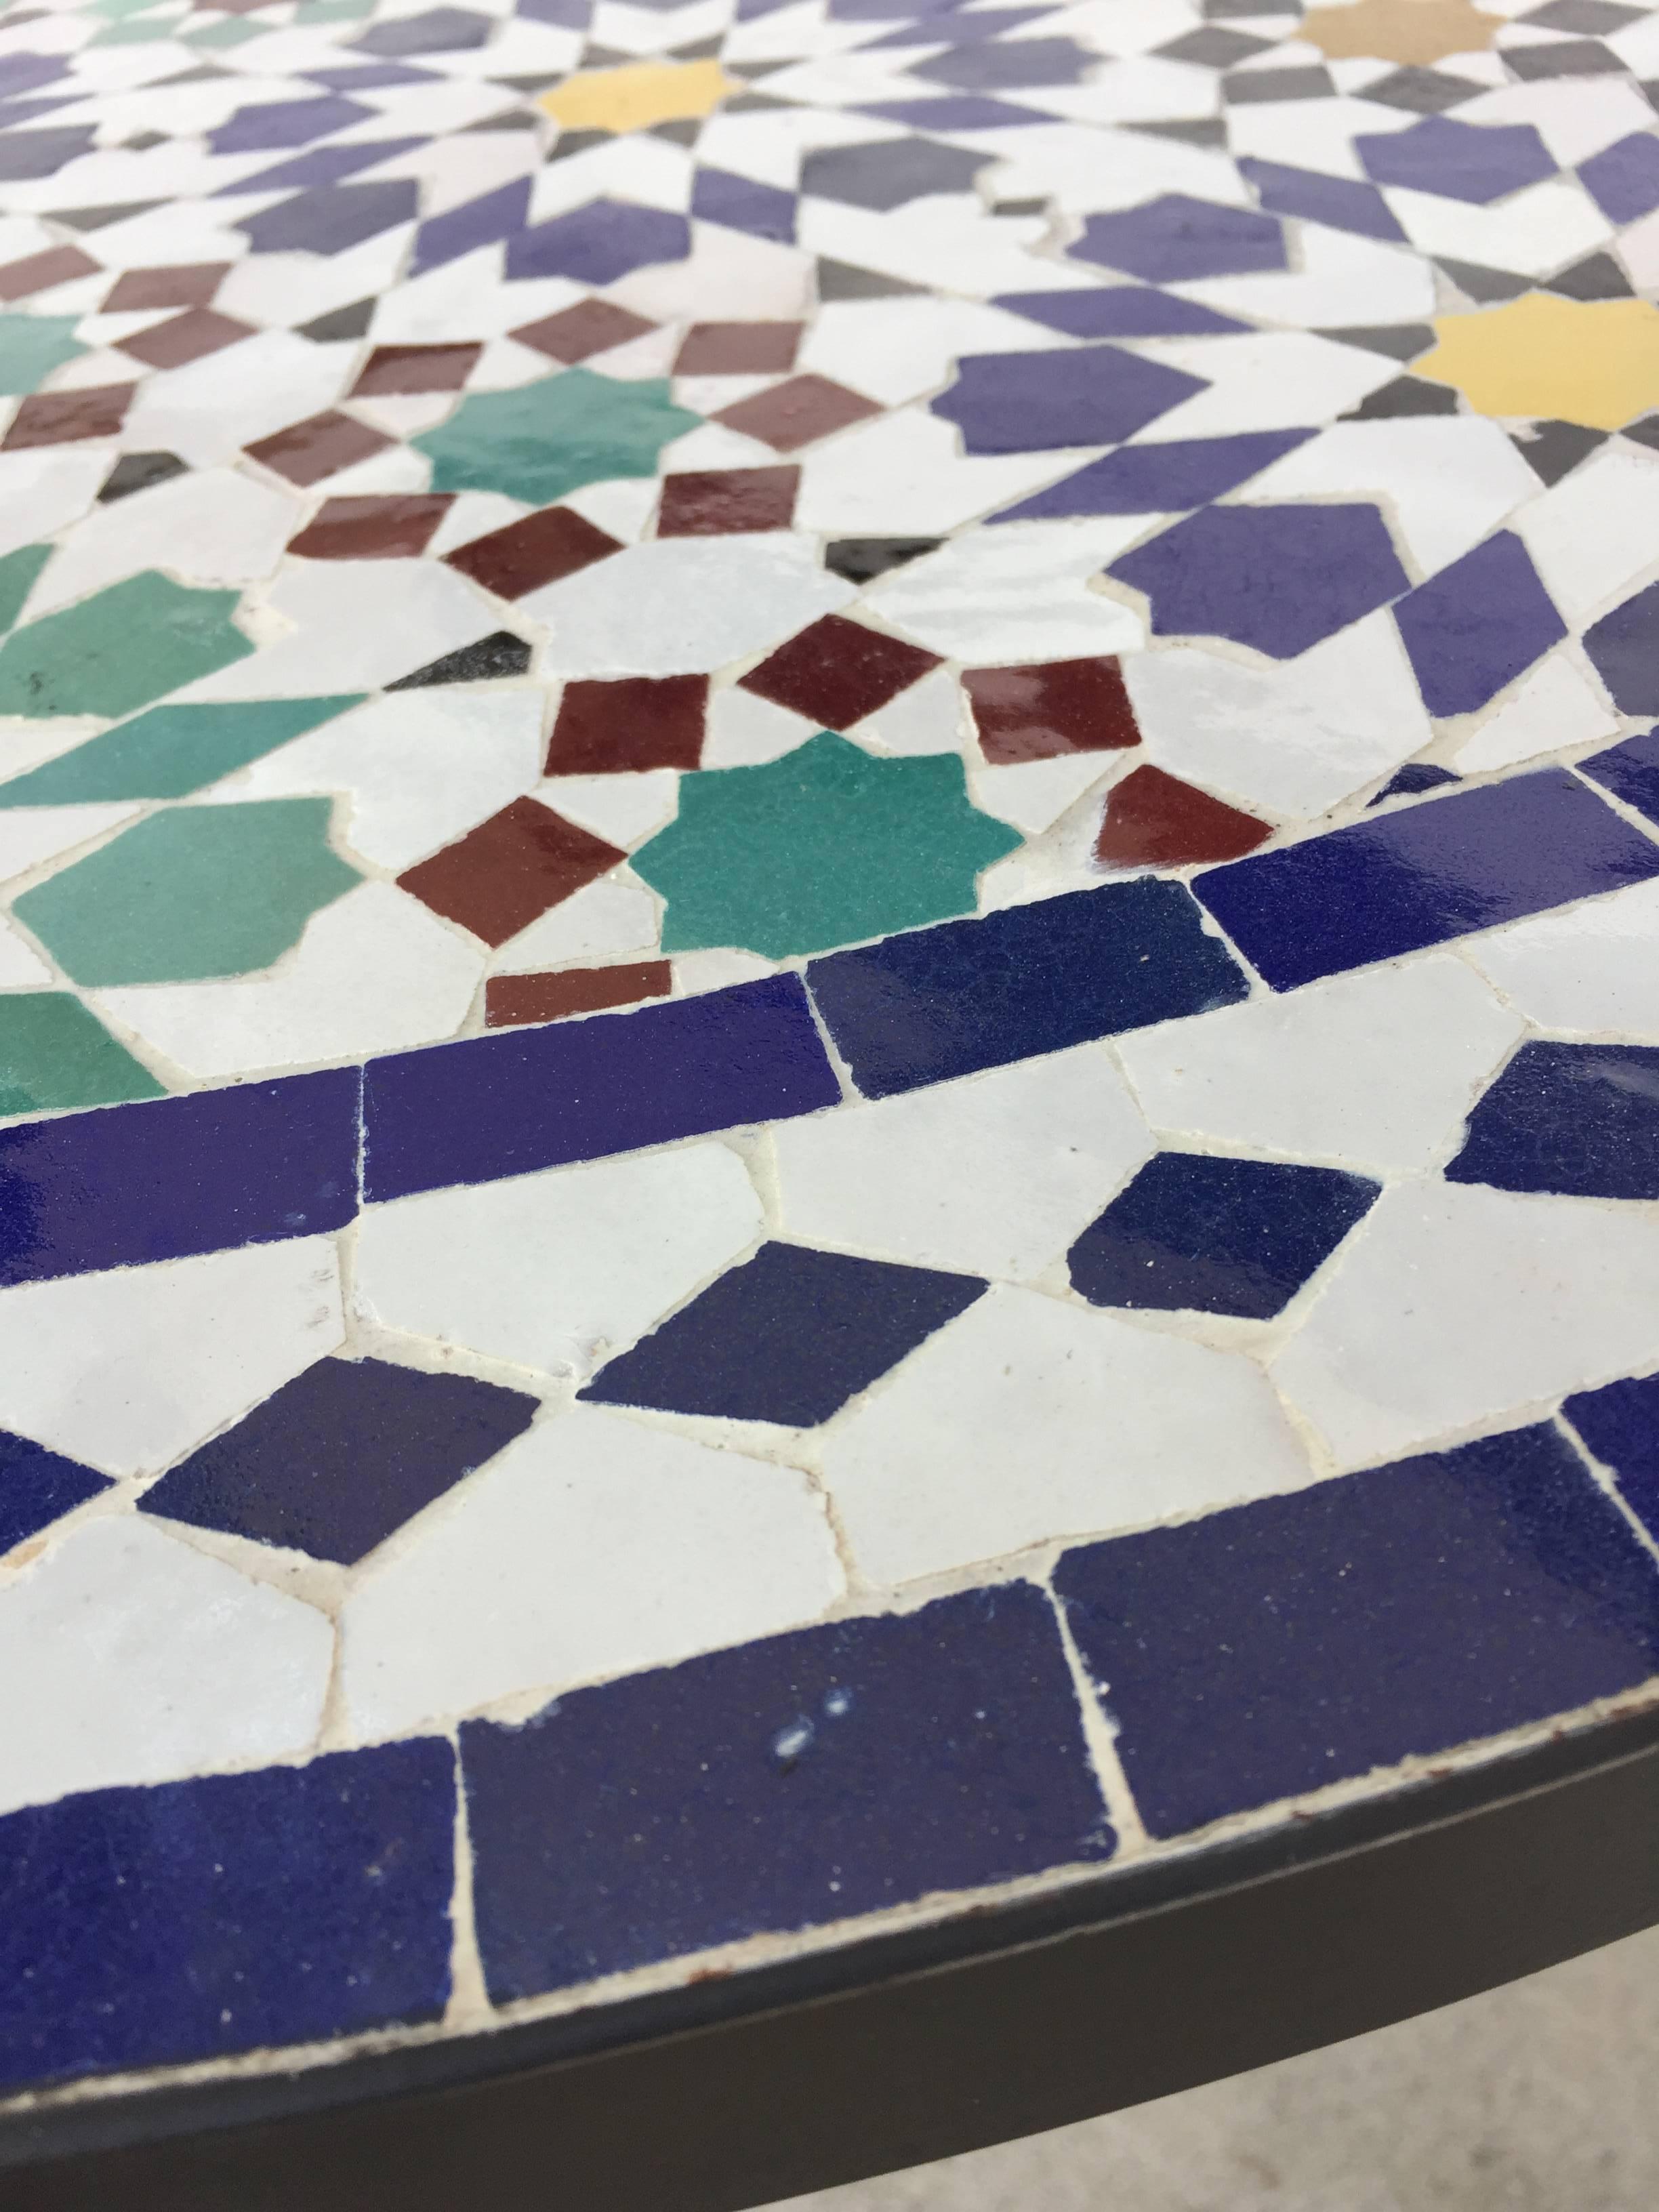 Hand-Crafted Moroccan Outdoor Mosaic Tile Table from Fez in Traditional Moorish Design For Sale